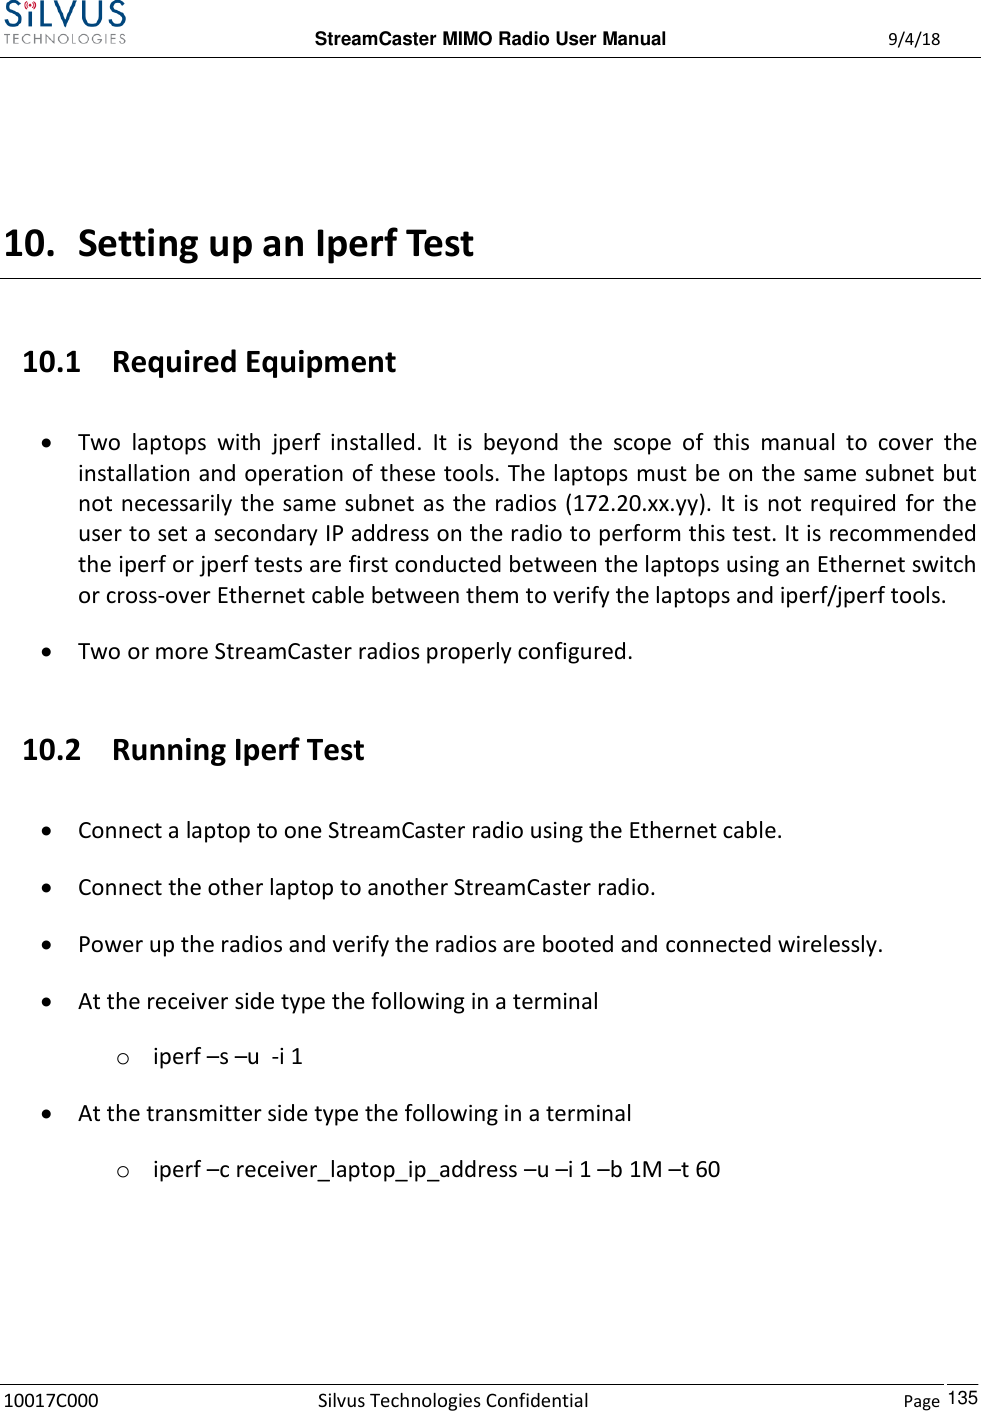  StreamCaster MIMO Radio User Manual  9/4/18 10017C000 Silvus Technologies Confidential    Page    135  10. Setting up an Iperf Test 10.1 Required Equipment  Two  laptops  with  jperf  installed.  It  is  beyond  the  scope  of  this  manual  to  cover  the installation and operation of these tools. The laptops must be on the same subnet but not necessarily the same subnet  as  the radios (172.20.xx.yy). It is  not required for the user to set a secondary IP address on the radio to perform this test. It is recommended the iperf or jperf tests are first conducted between the laptops using an Ethernet switch or cross-over Ethernet cable between them to verify the laptops and iperf/jperf tools.  Two or more StreamCaster radios properly configured.  10.2 Running Iperf Test  Connect a laptop to one StreamCaster radio using the Ethernet cable.  Connect the other laptop to another StreamCaster radio.  Power up the radios and verify the radios are booted and connected wirelessly.  At the receiver side type the following in a terminal o iperf –s –u  -i 1  At the transmitter side type the following in a terminal o iperf –c receiver_laptop_ip_address –u –i 1 –b 1M –t 60    